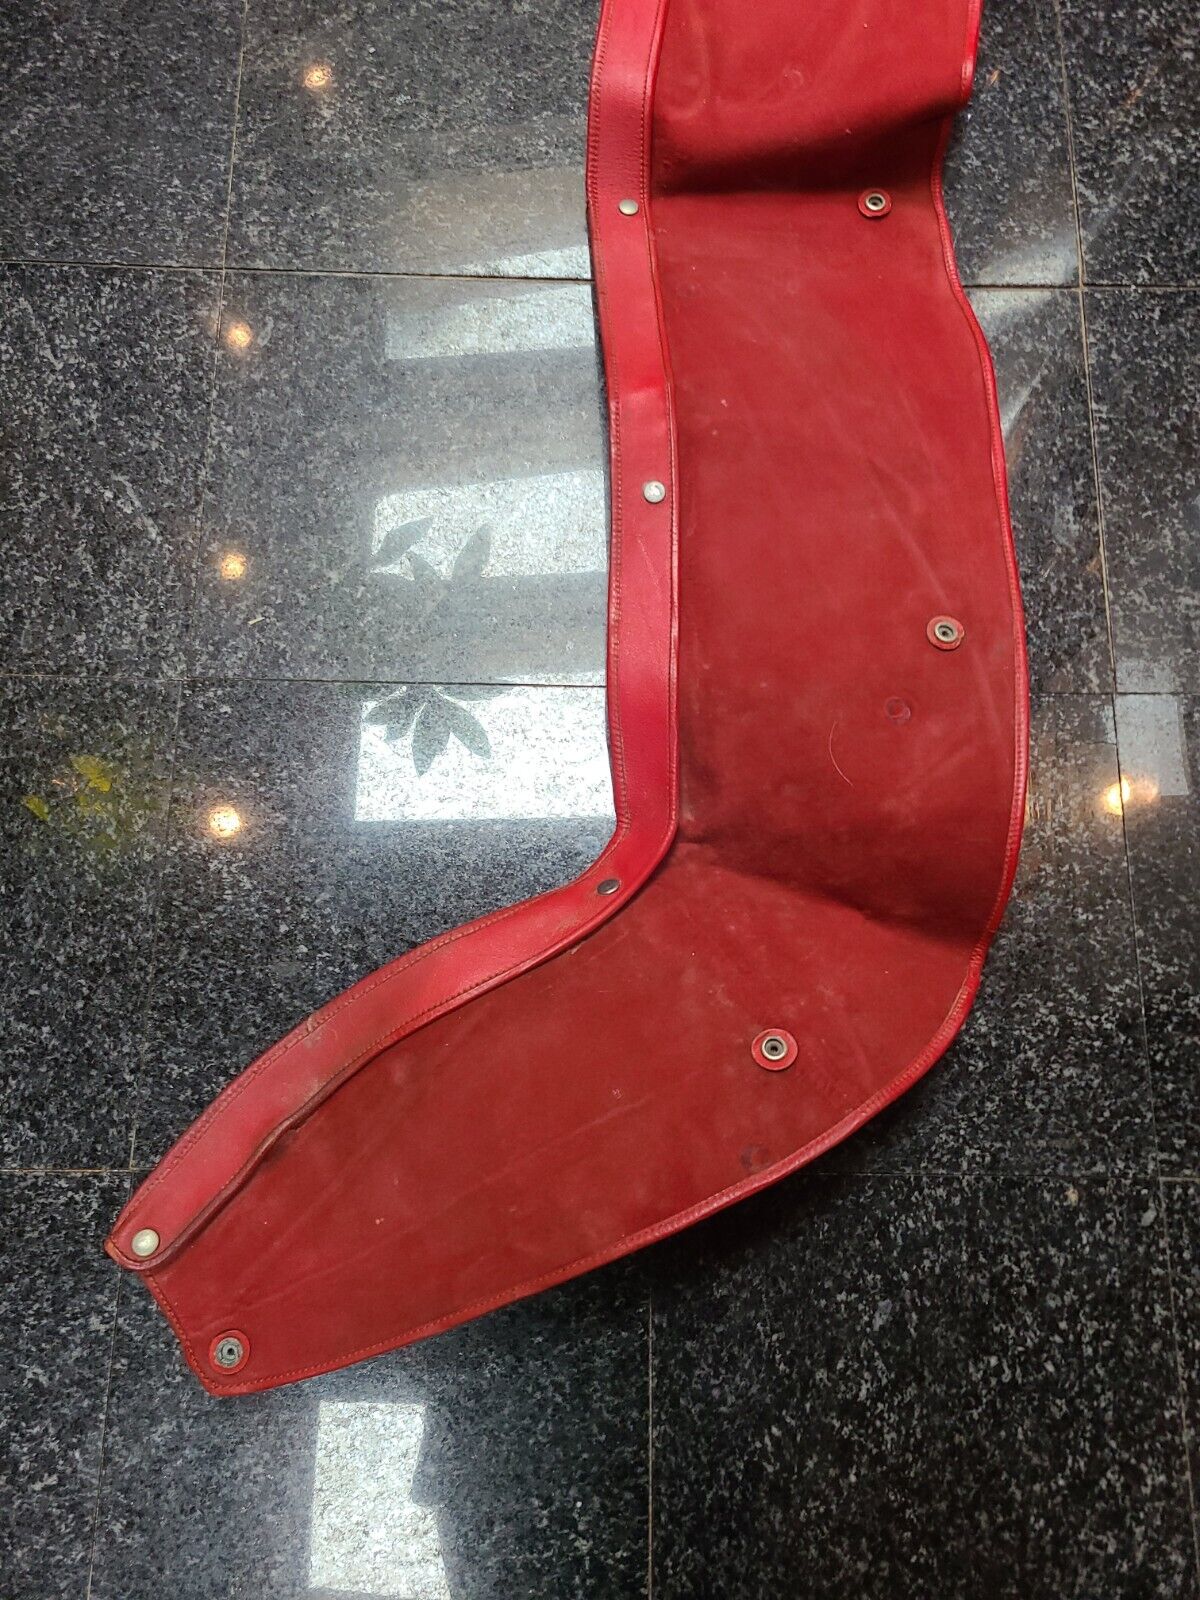 Mercedes 190SL boot cover original oem red leather 1954-63 factory w121 used dry